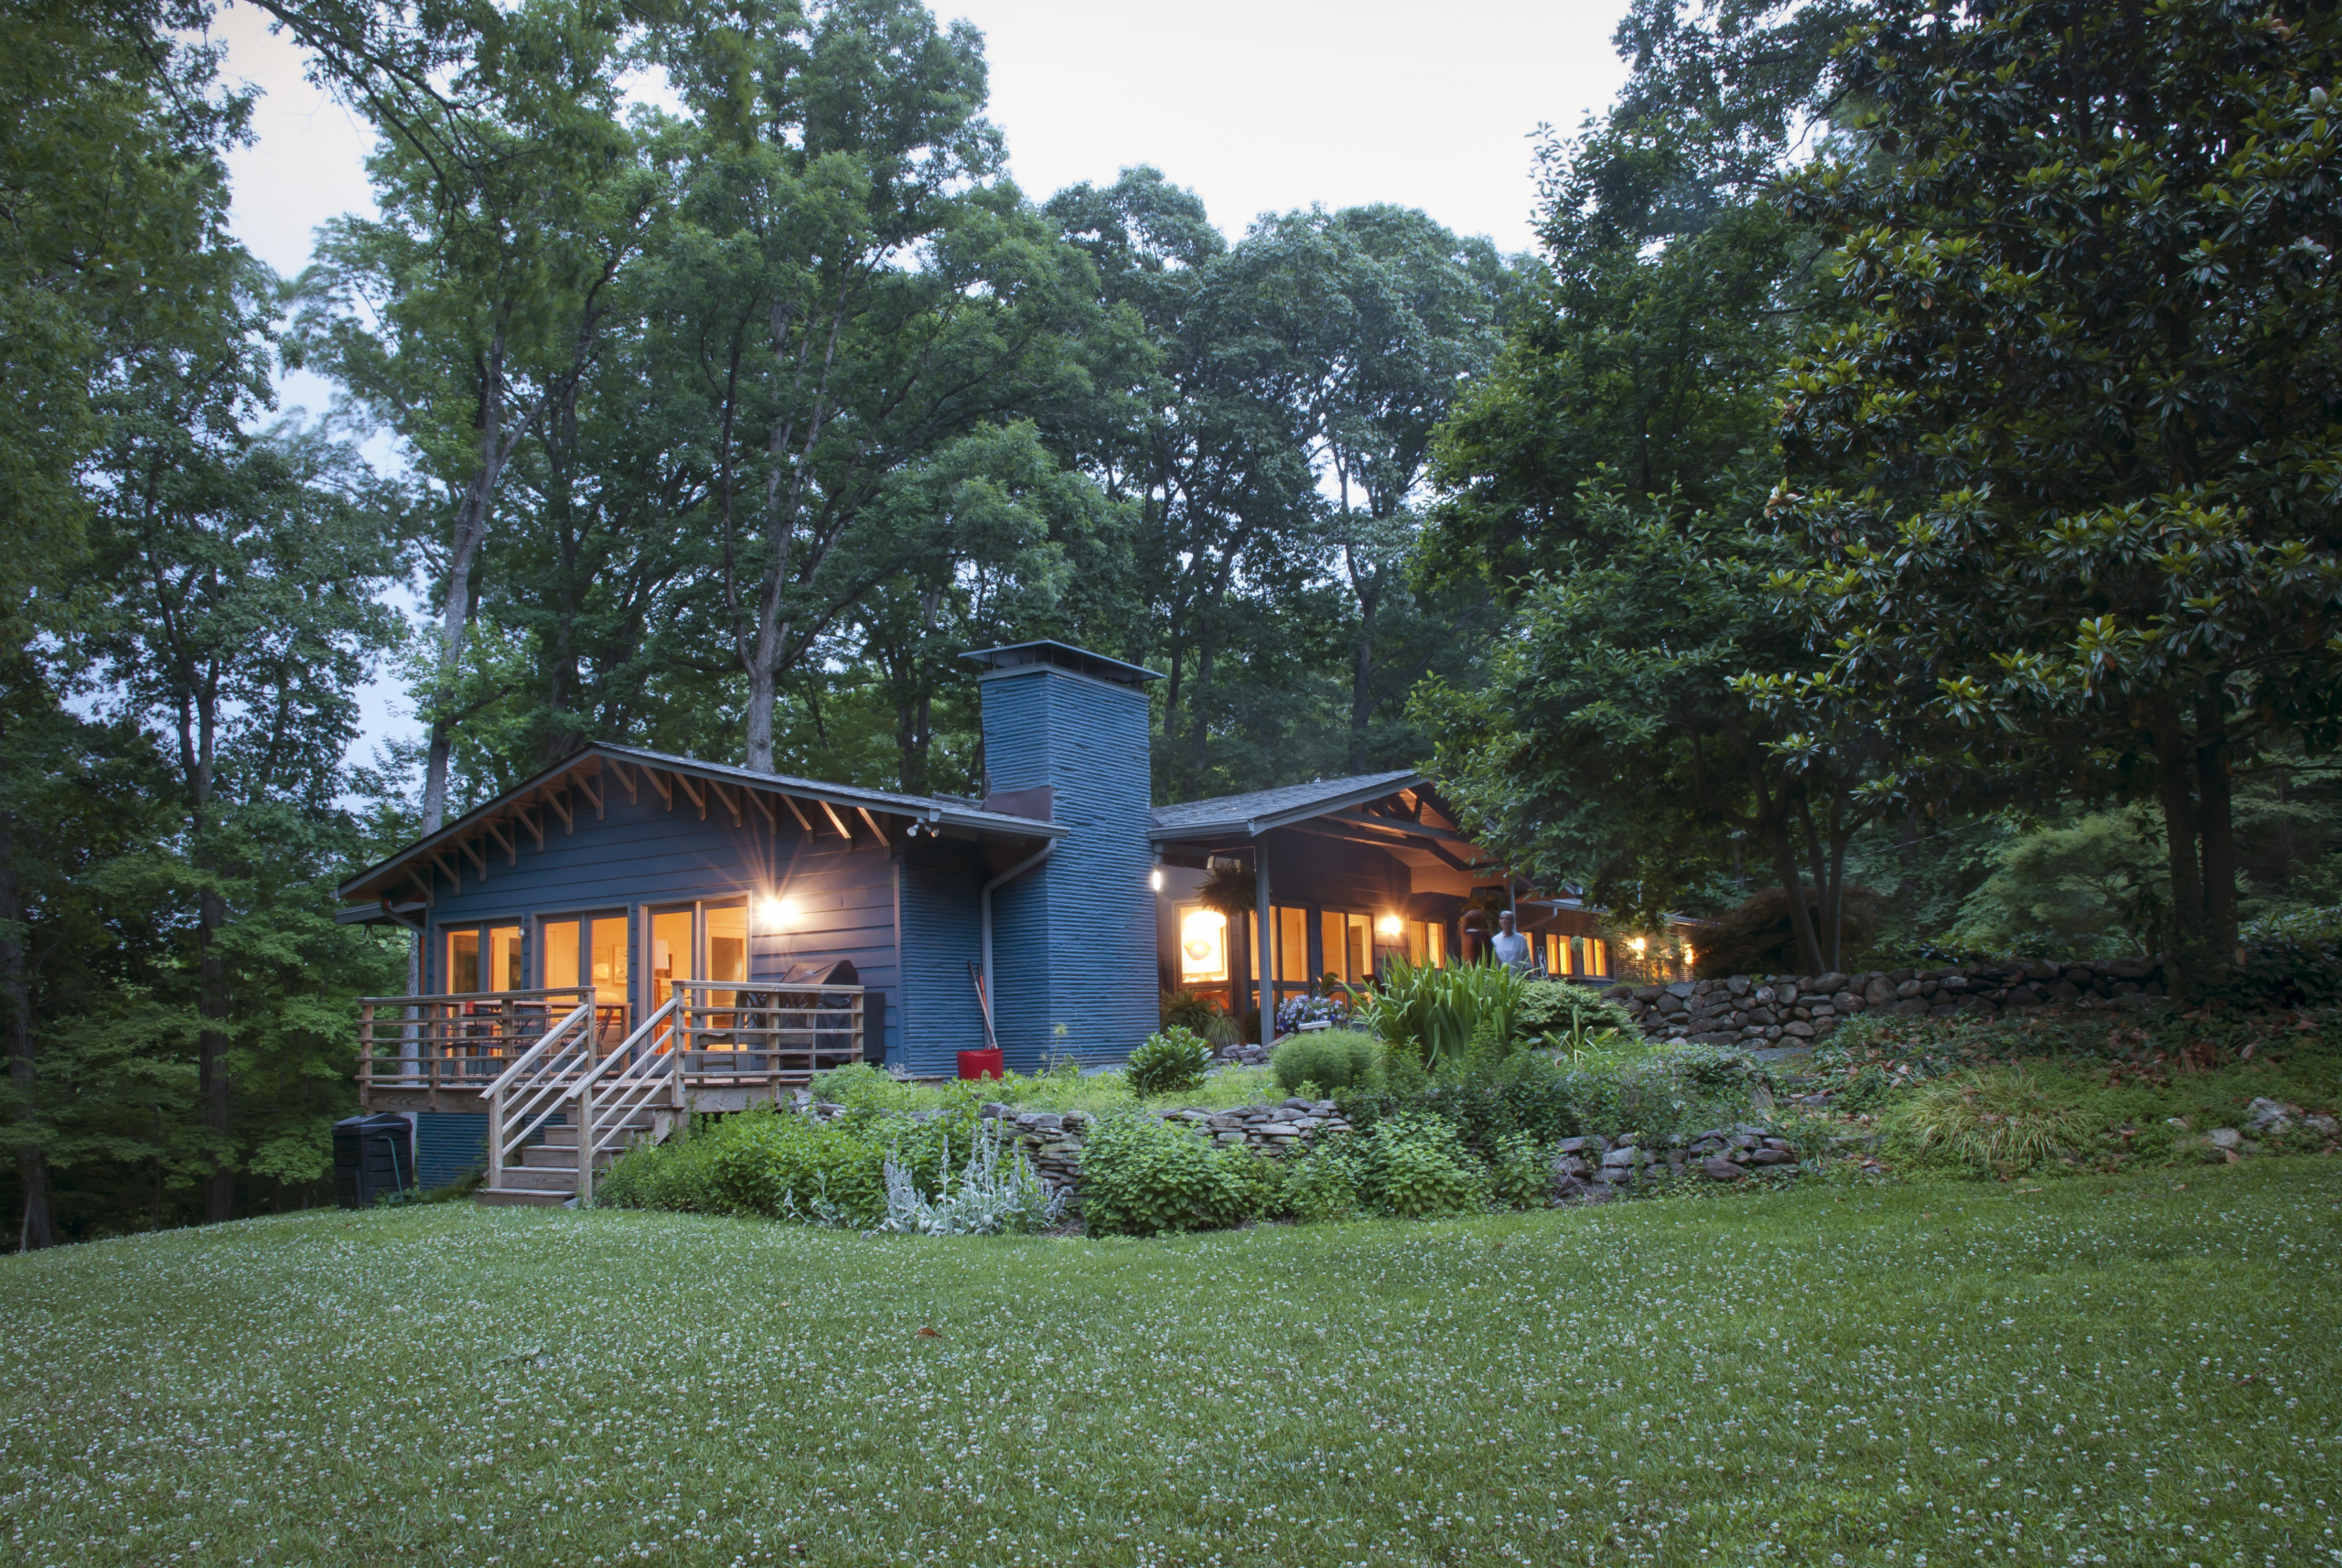 The house glows from within at dusk, surrounded by a lush garden and trees